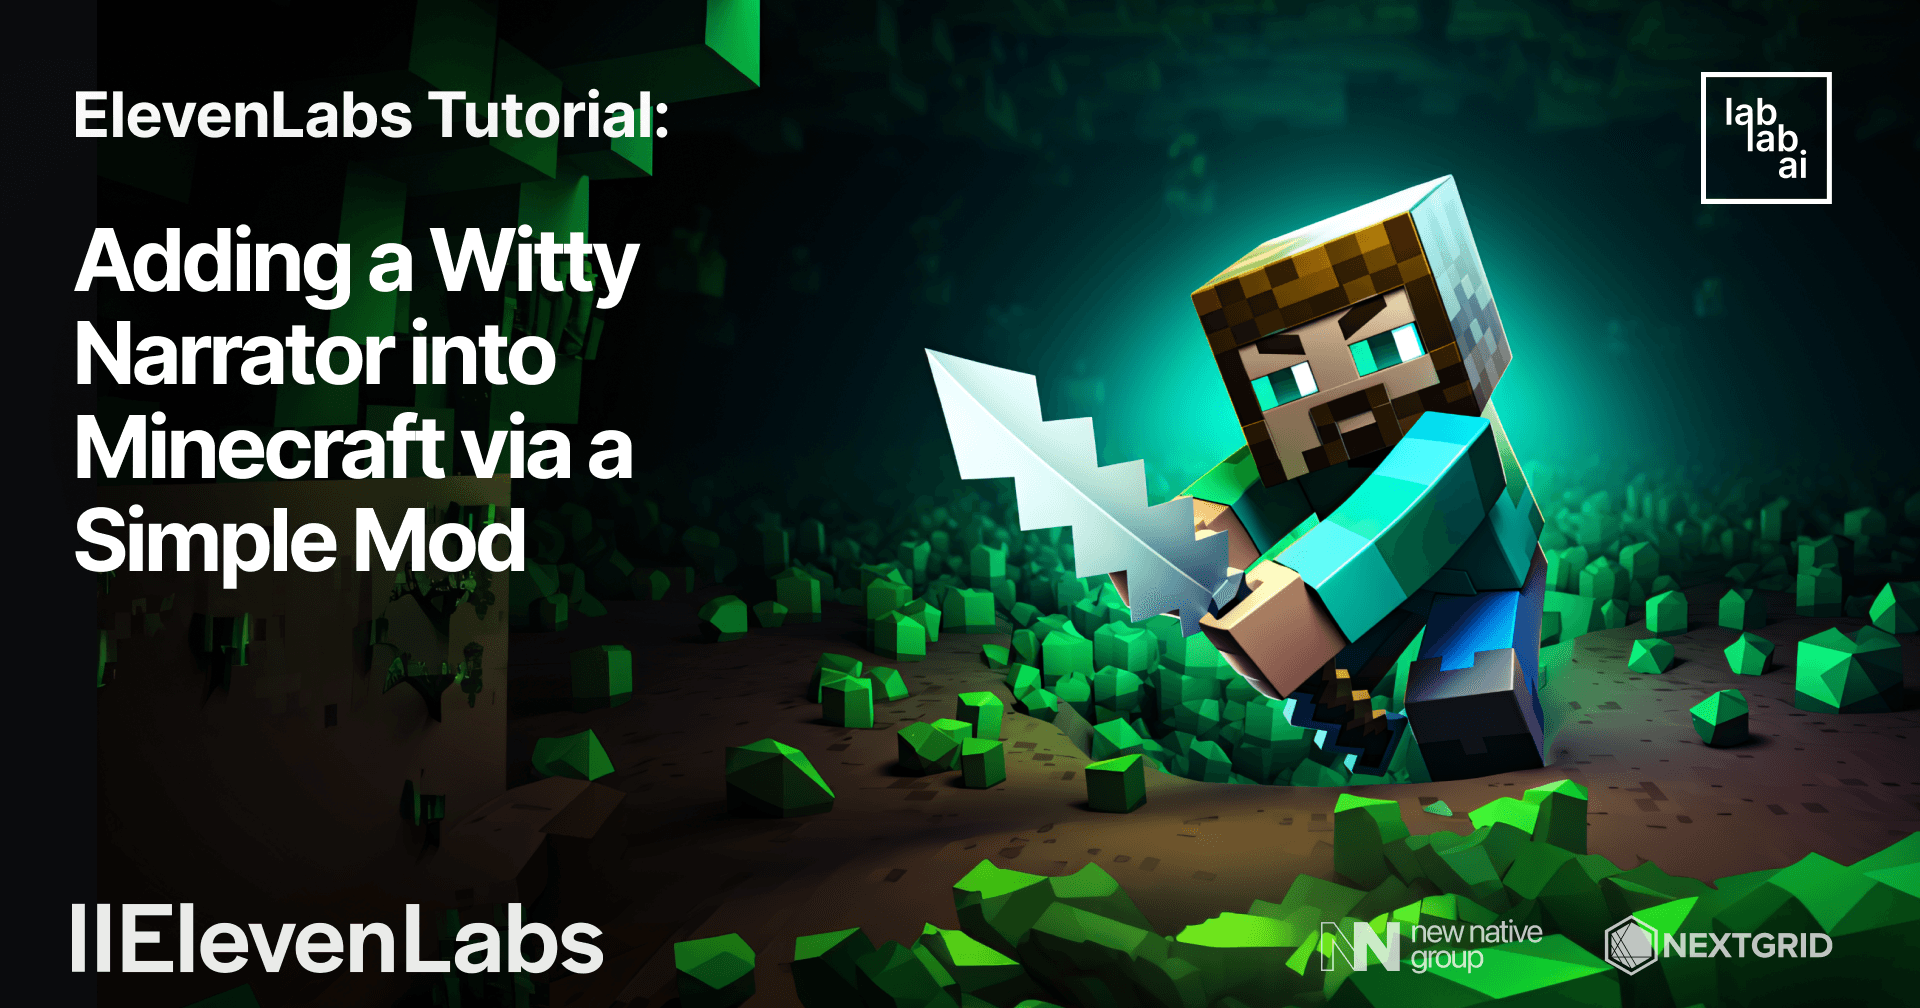 ElevenLabs Tutorial: Adding a Witty Narrator into Minecraft via a Simple Mod